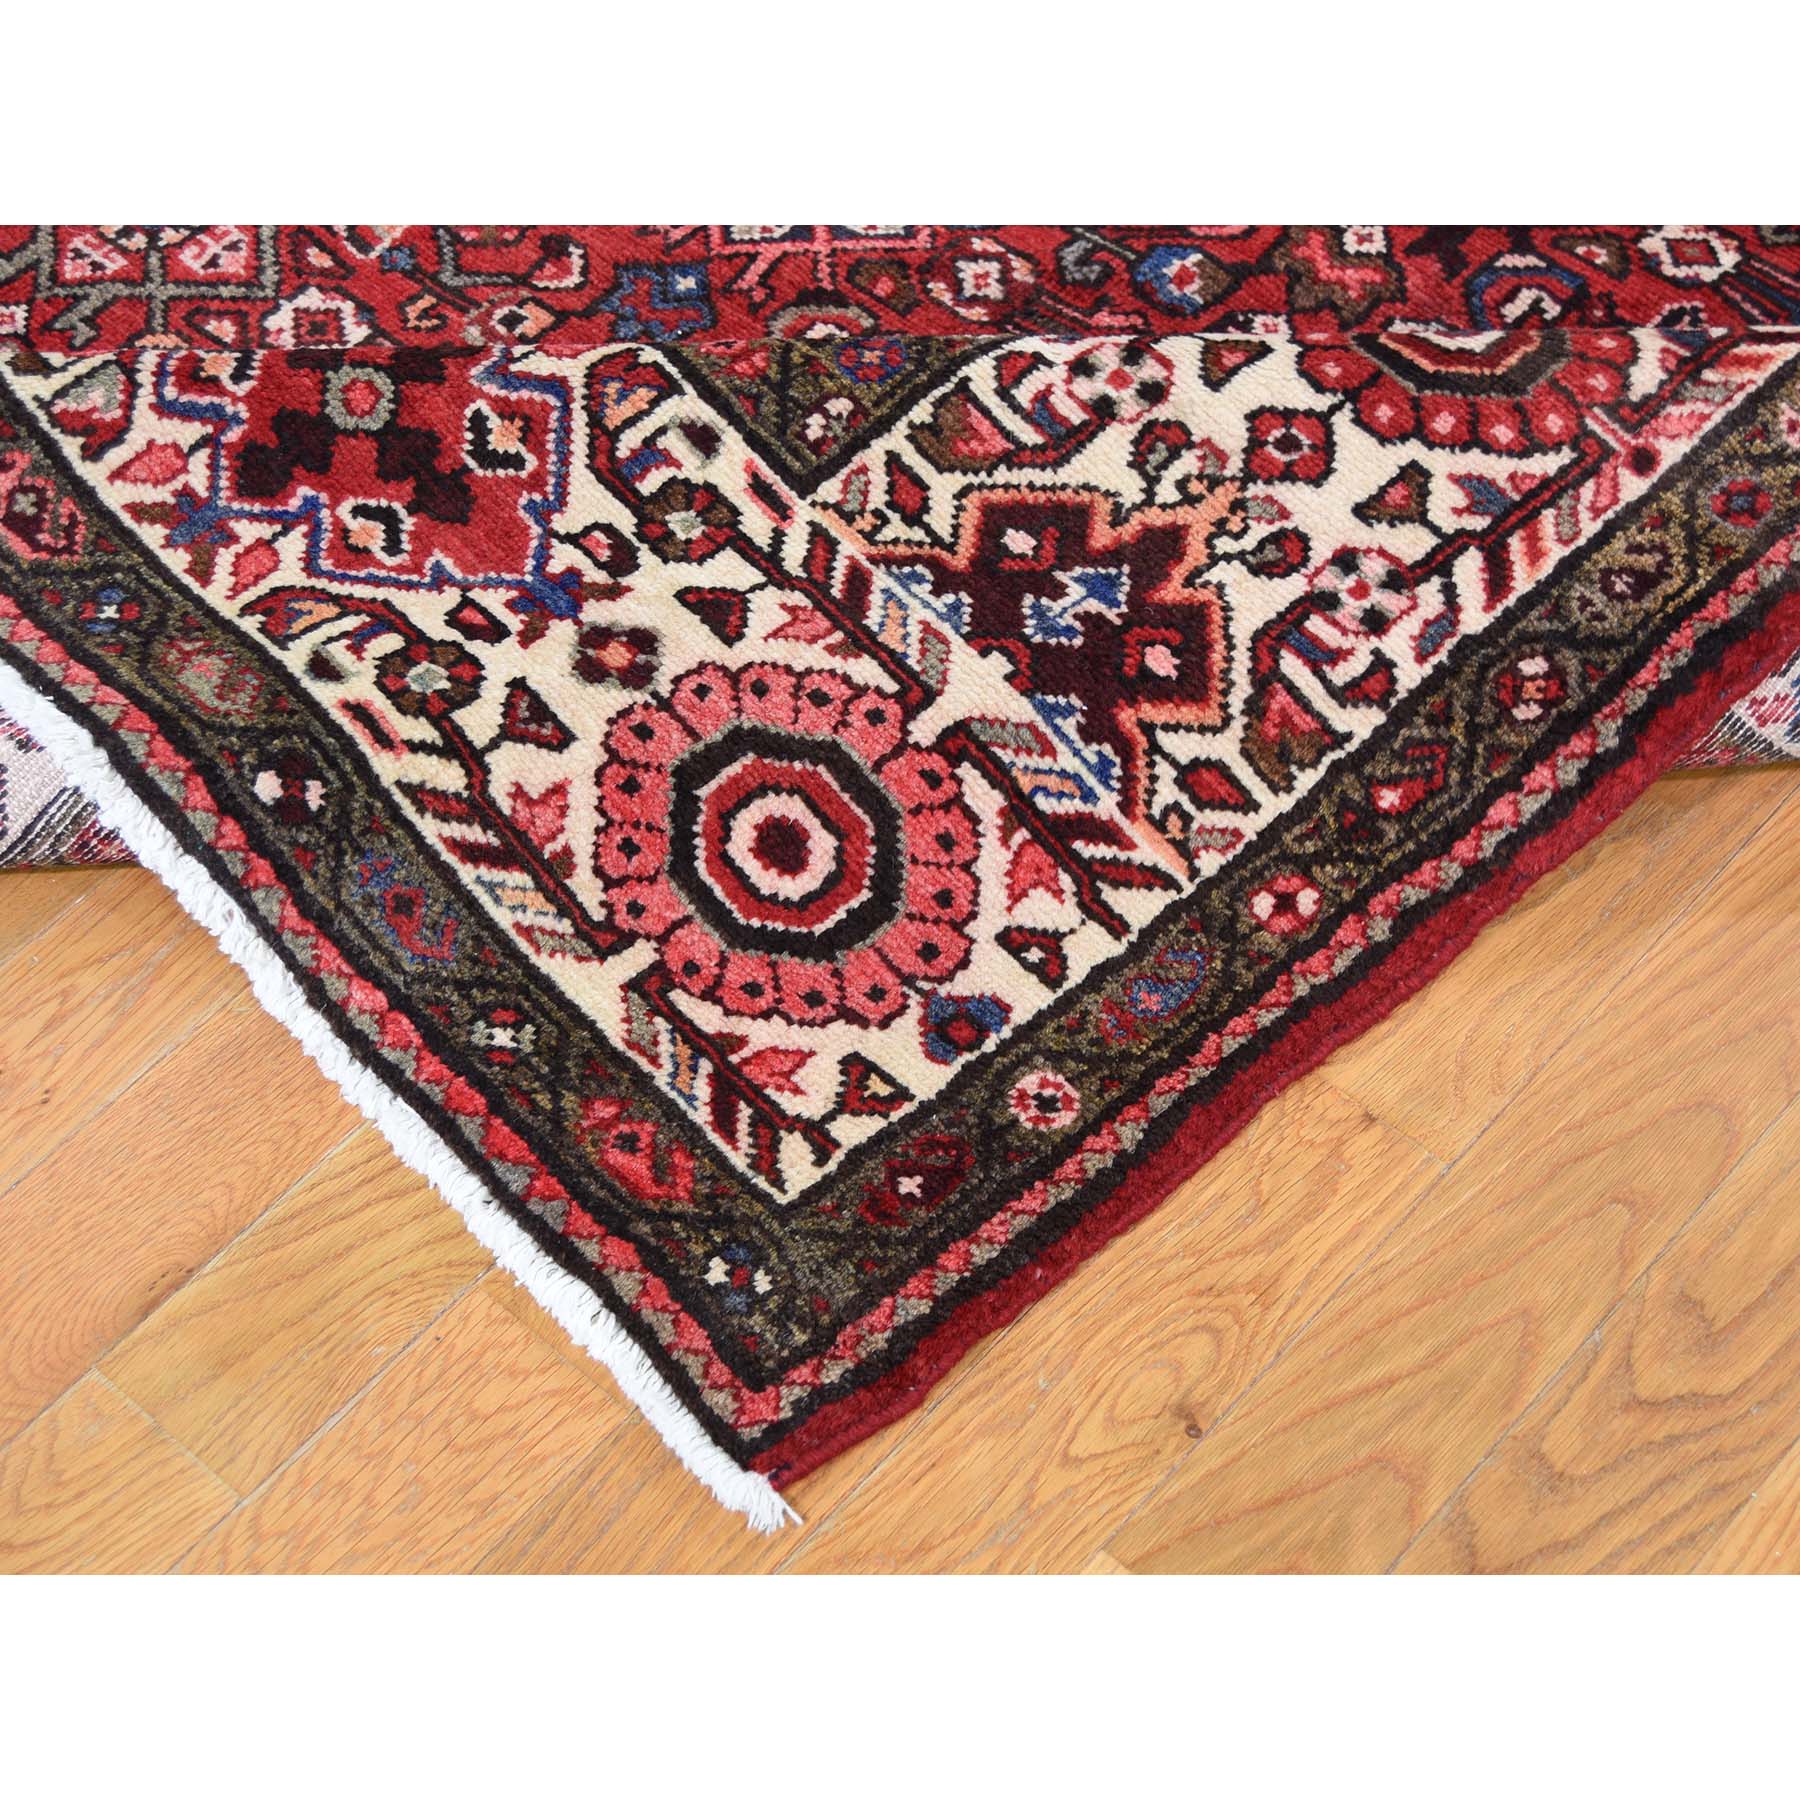 7-2 x11- Red New Persian Hussainabad Pure Wool Hand-Knotted Oriental Rug 